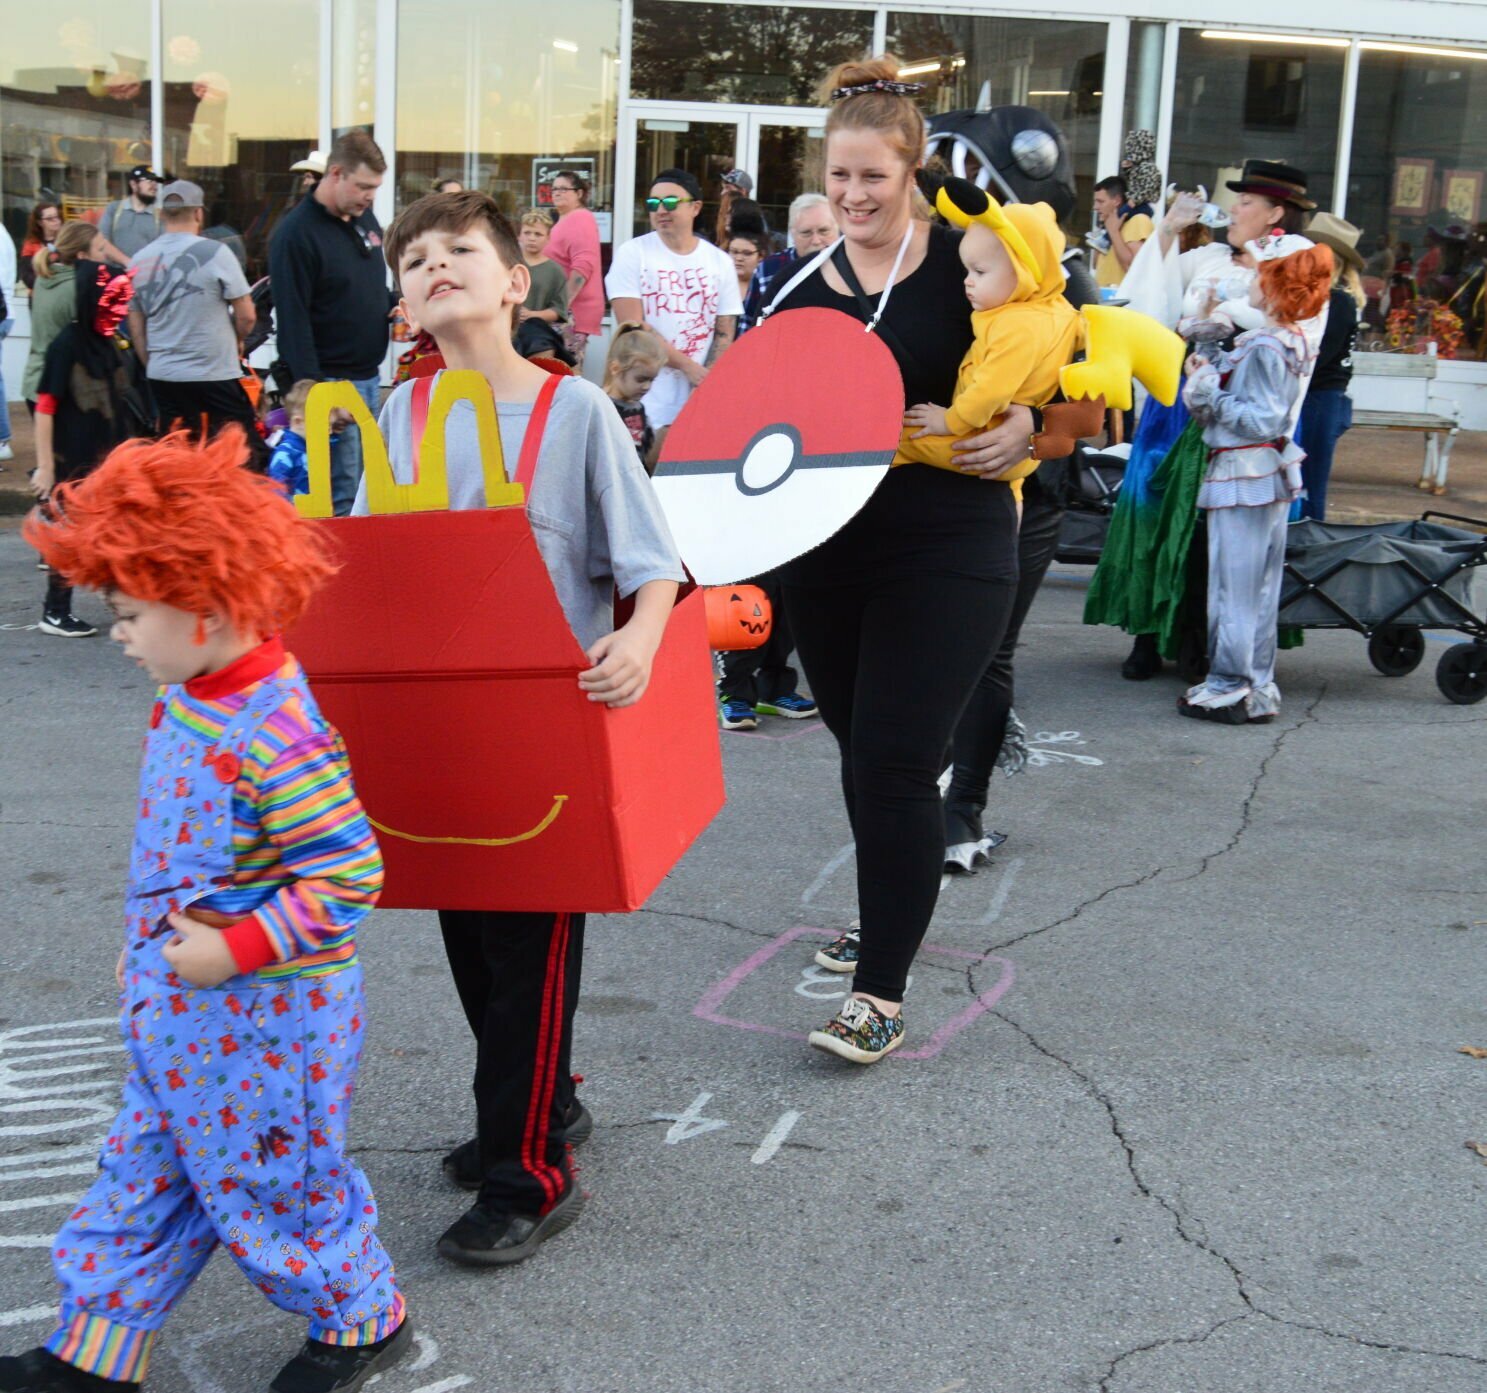 The 2023 Scare on the Square, set to take place from 5 to 7 p.m. Tuesday, will culminate in a costume parade that makes its way around Court Square in West Plains. This photo shows some of the creative costumes worn during last year's parade.